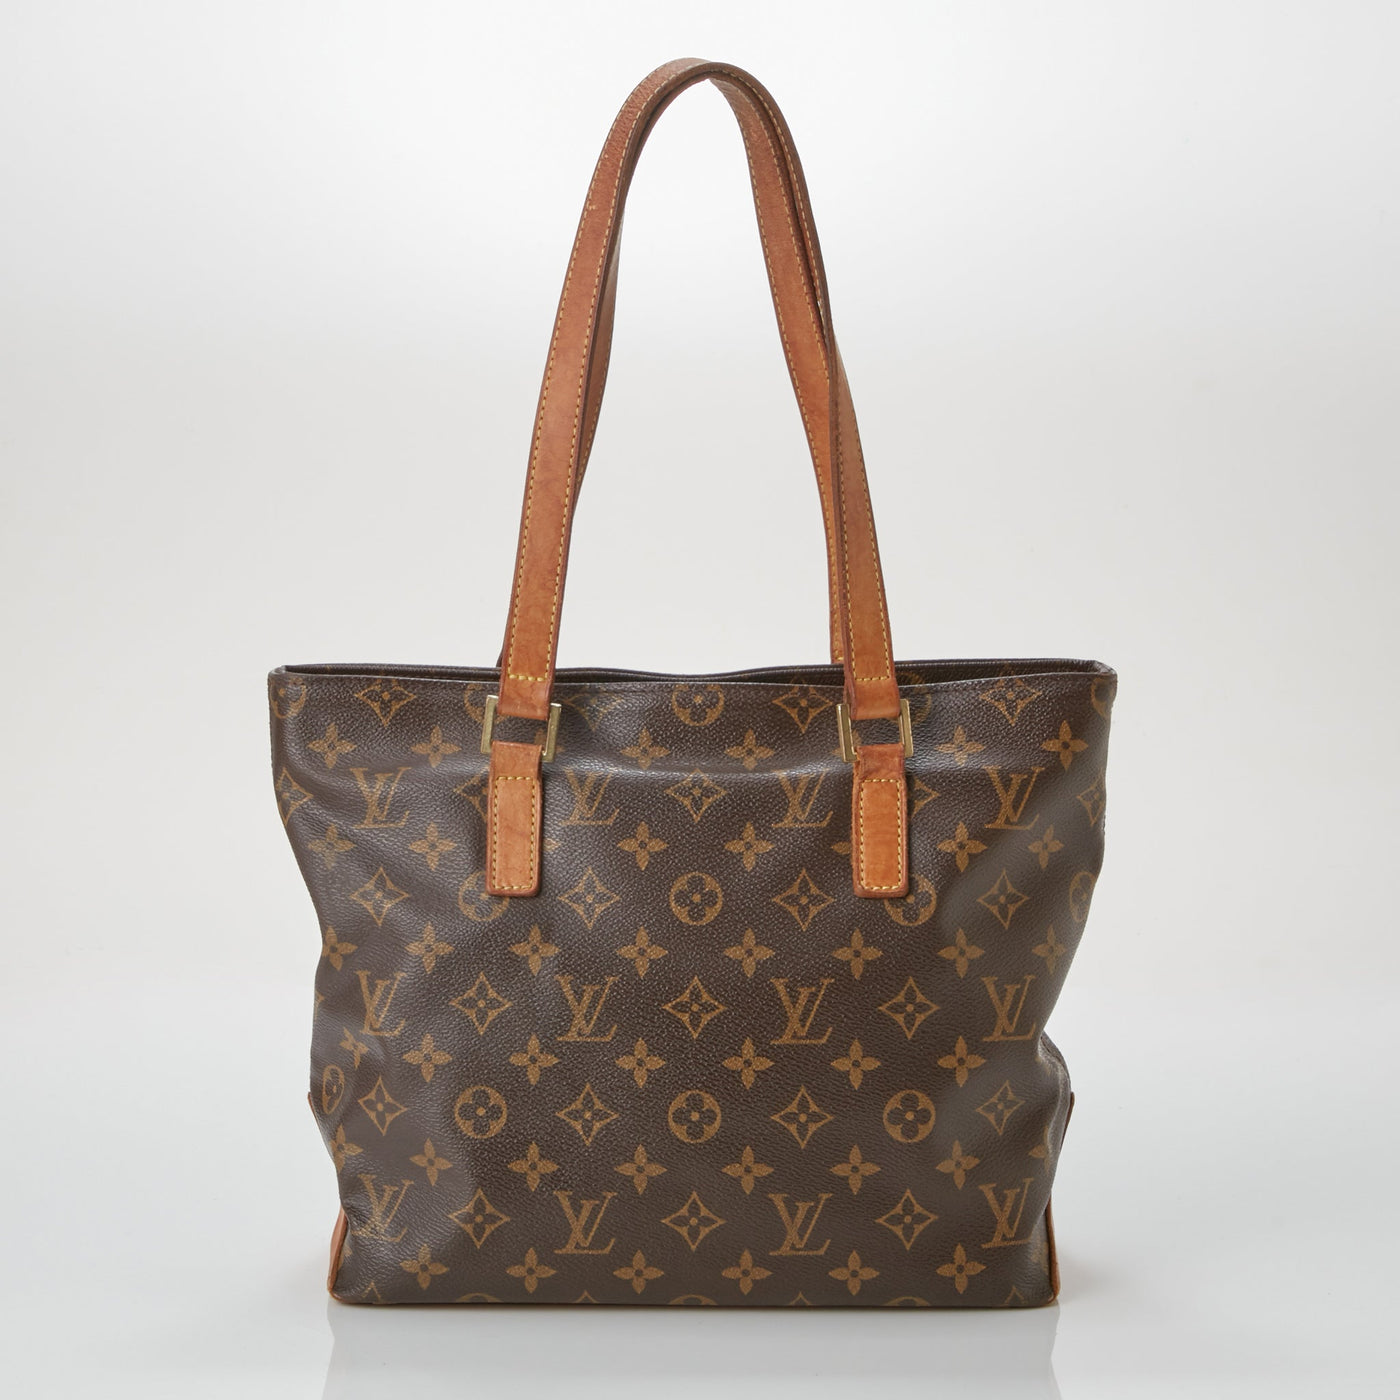 LOUIS VUITTON/カバピアノ/ルイヴィトン/USED